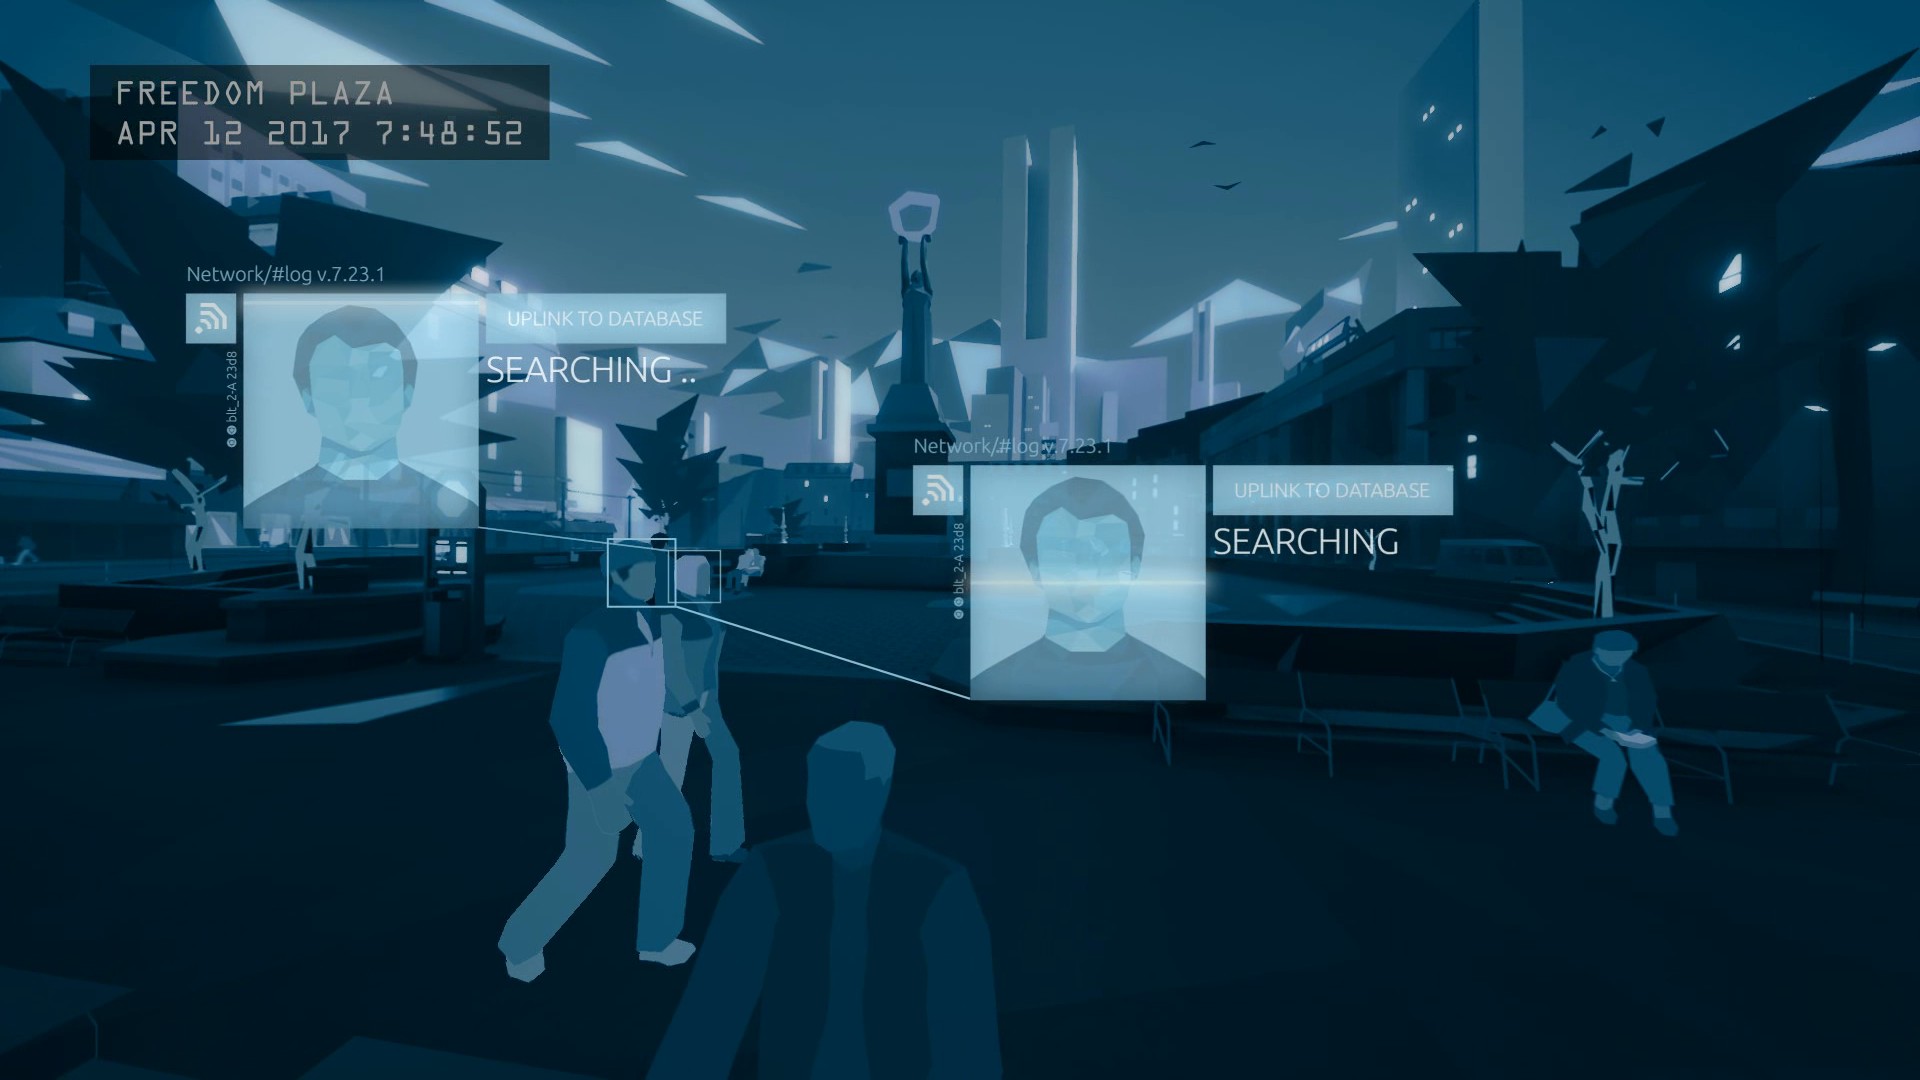 You Can Make A Game About Government Surveillance, But You Can’t Make People Care